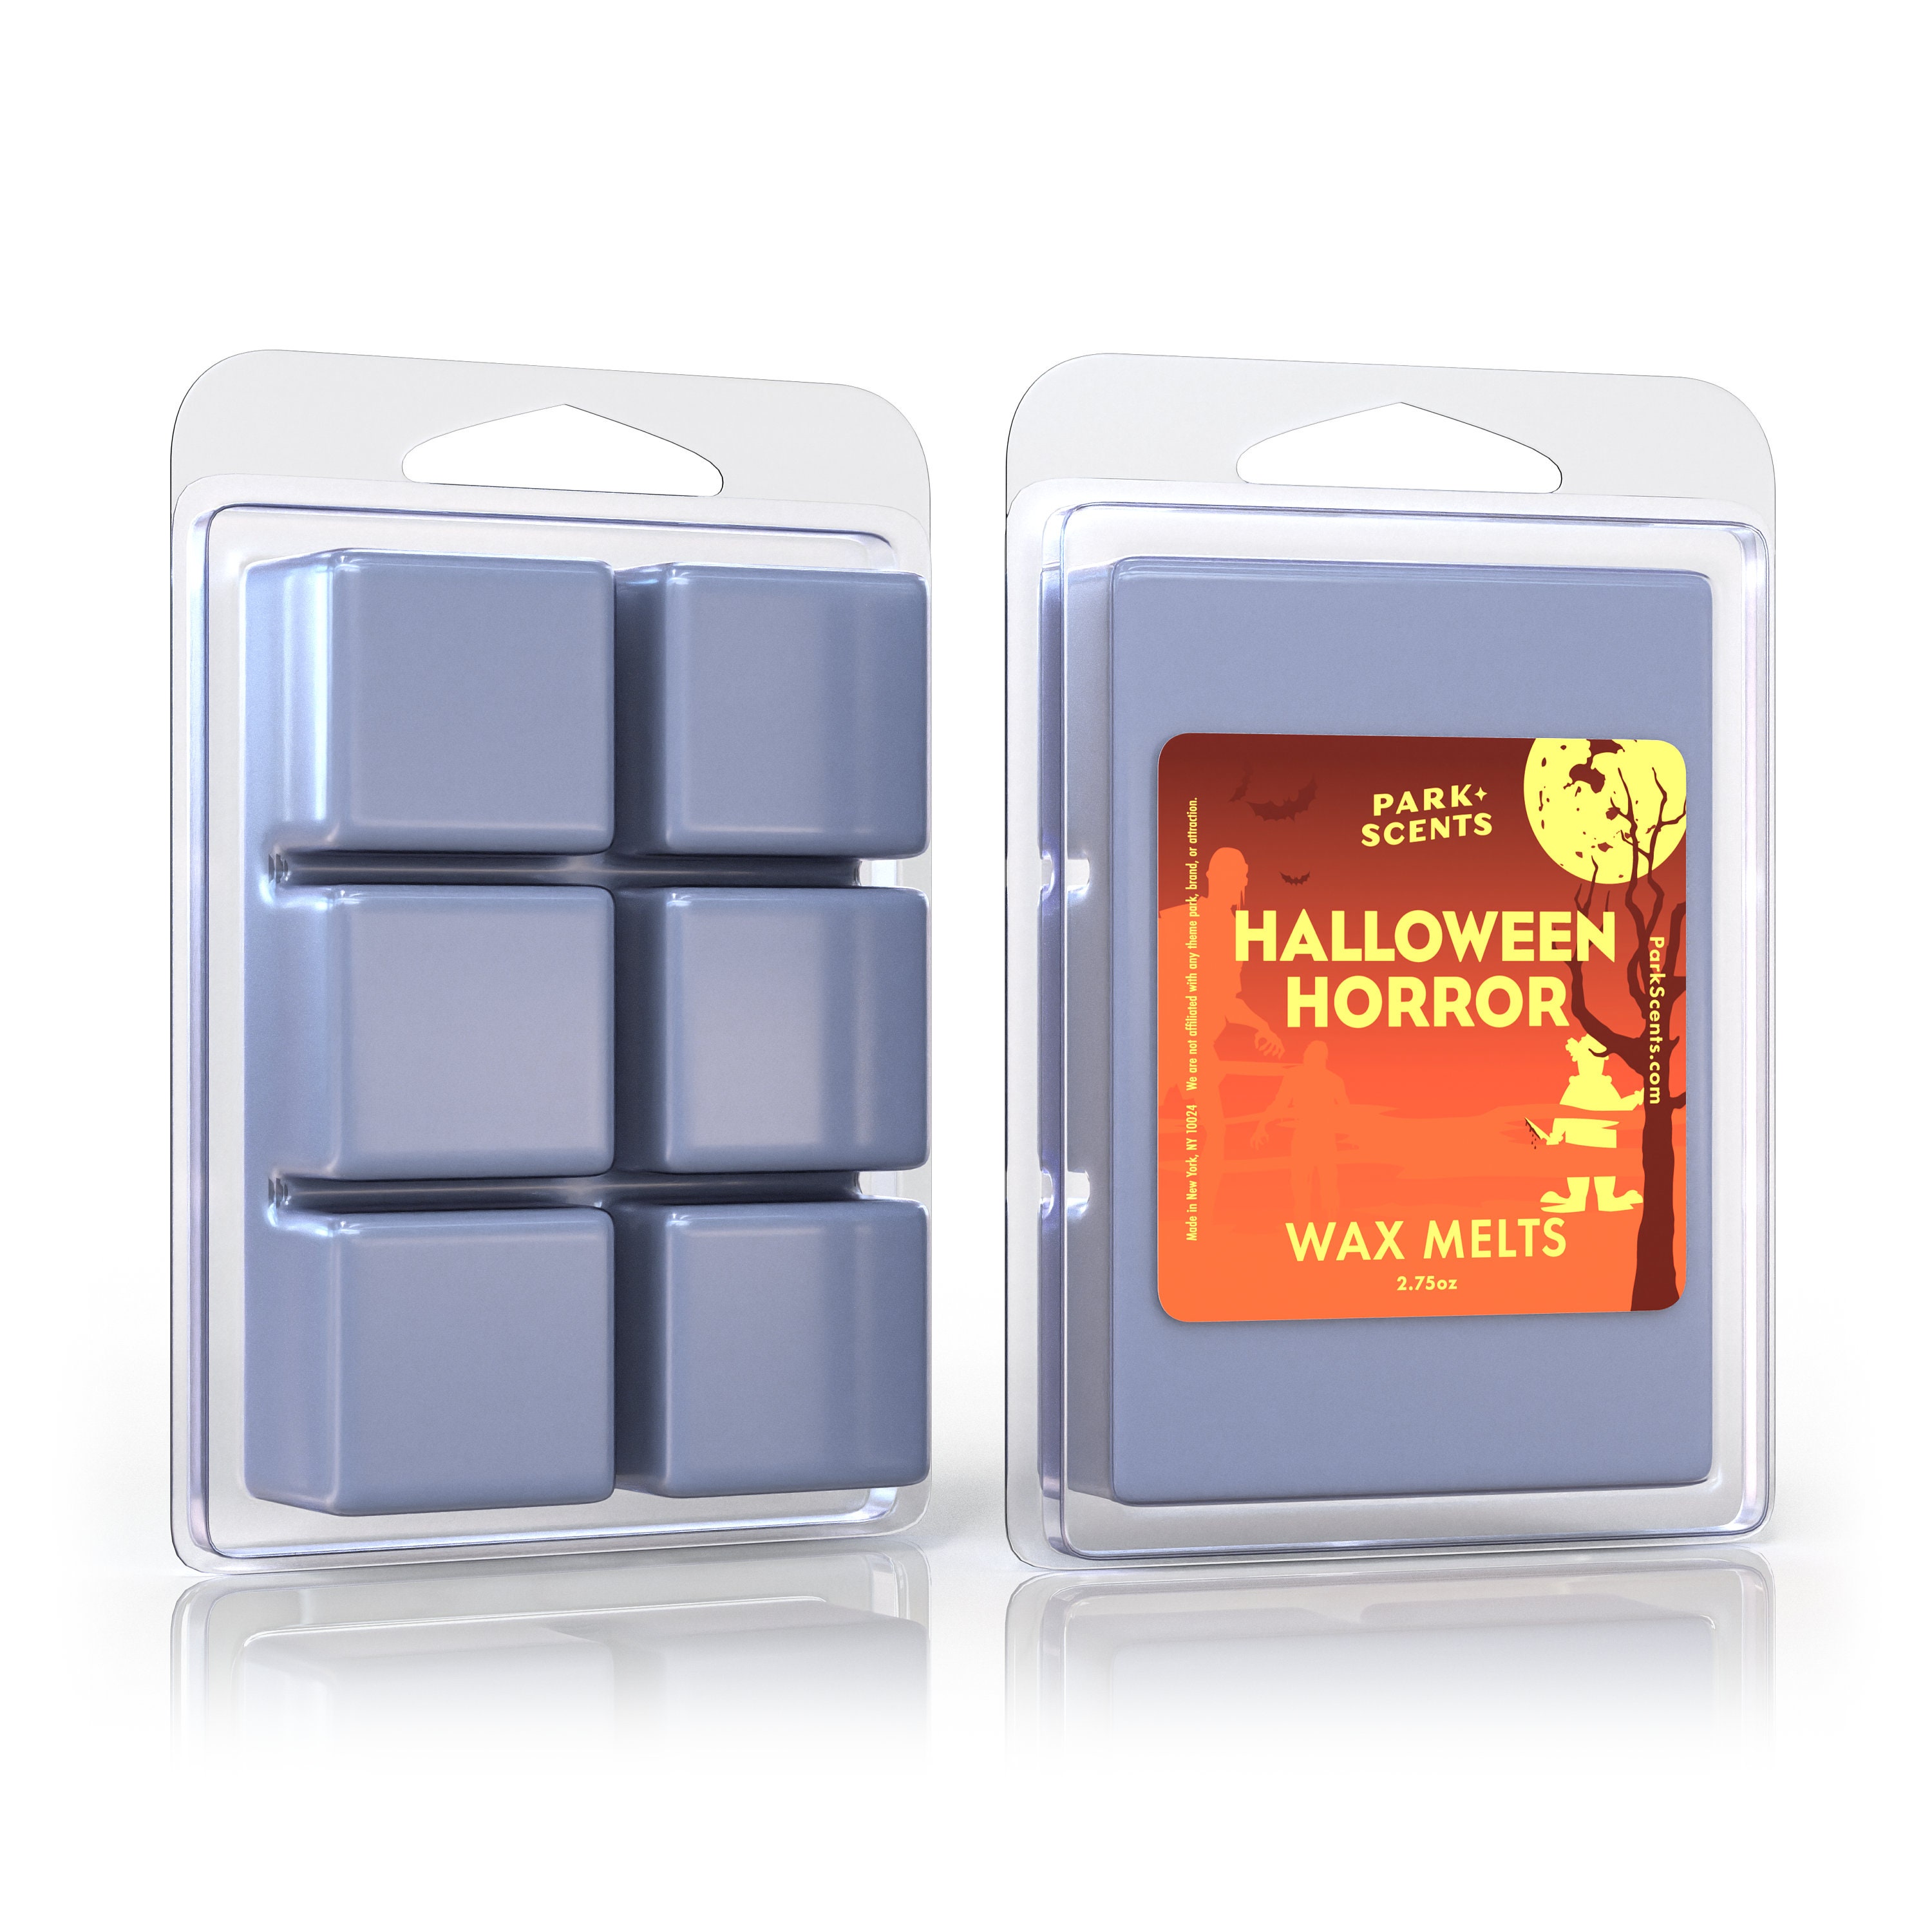 Witches Sisters Snap Bars Wax Melts for Warmer Halloween Wax Melts